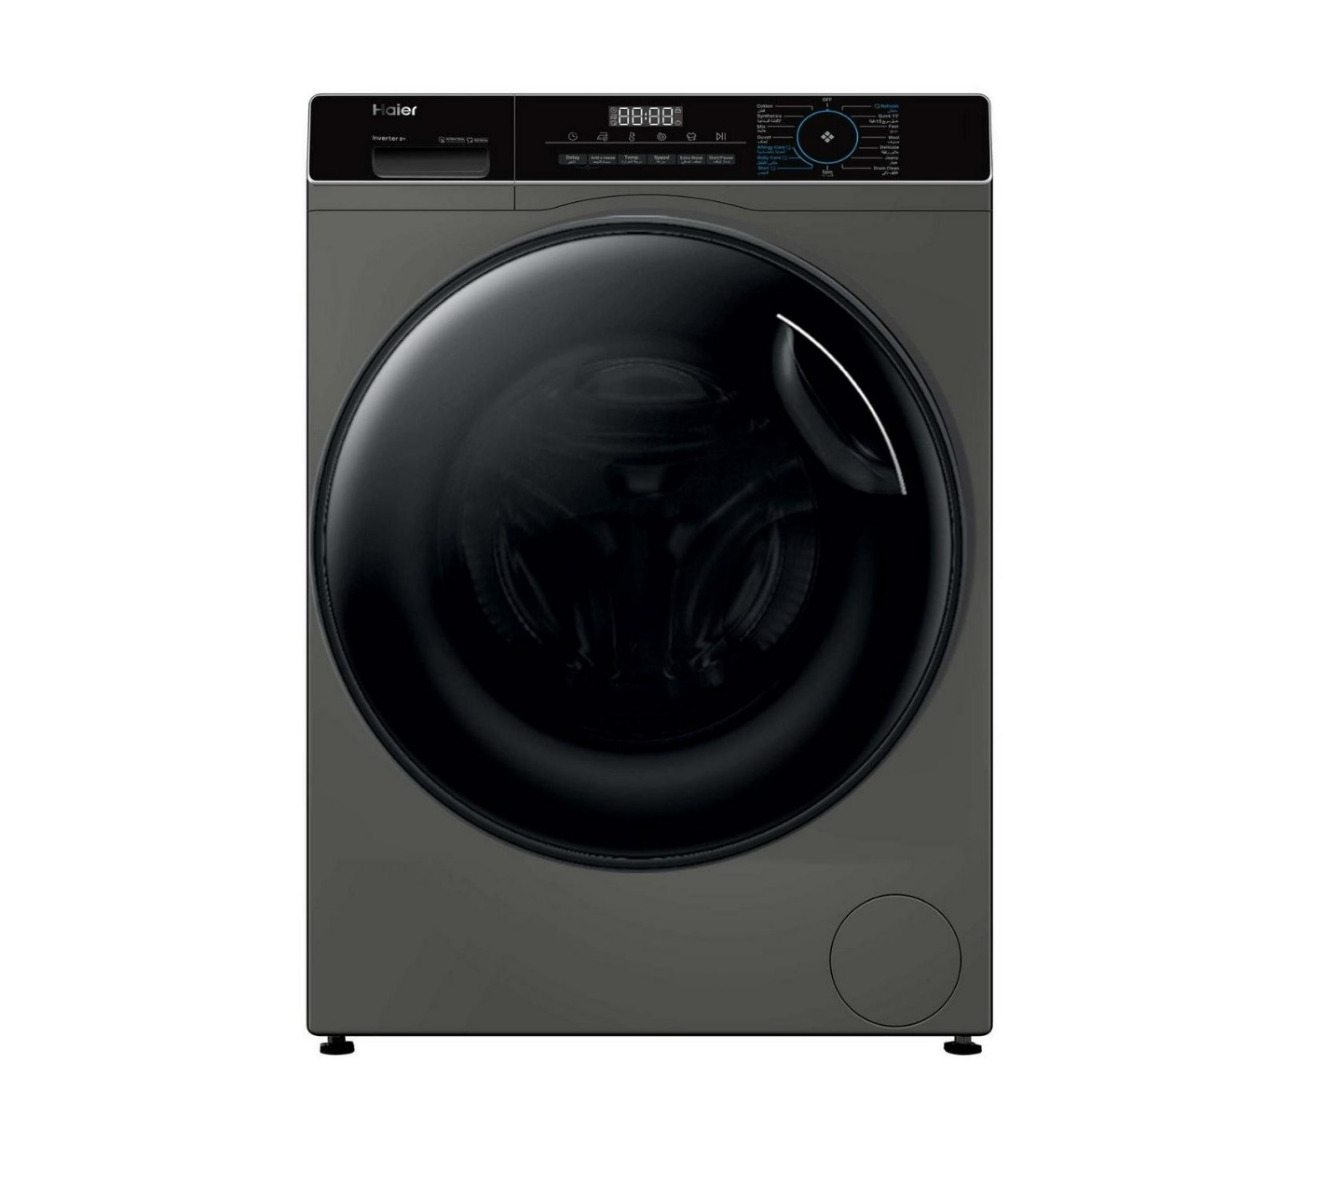 Haier Washing Machine Front Load 9 Kg, Drying 75%, 1200 cycles, 14 Programs, Allergy Care - Steam - Inverter Motor, Silver - HW90-BP14939S6